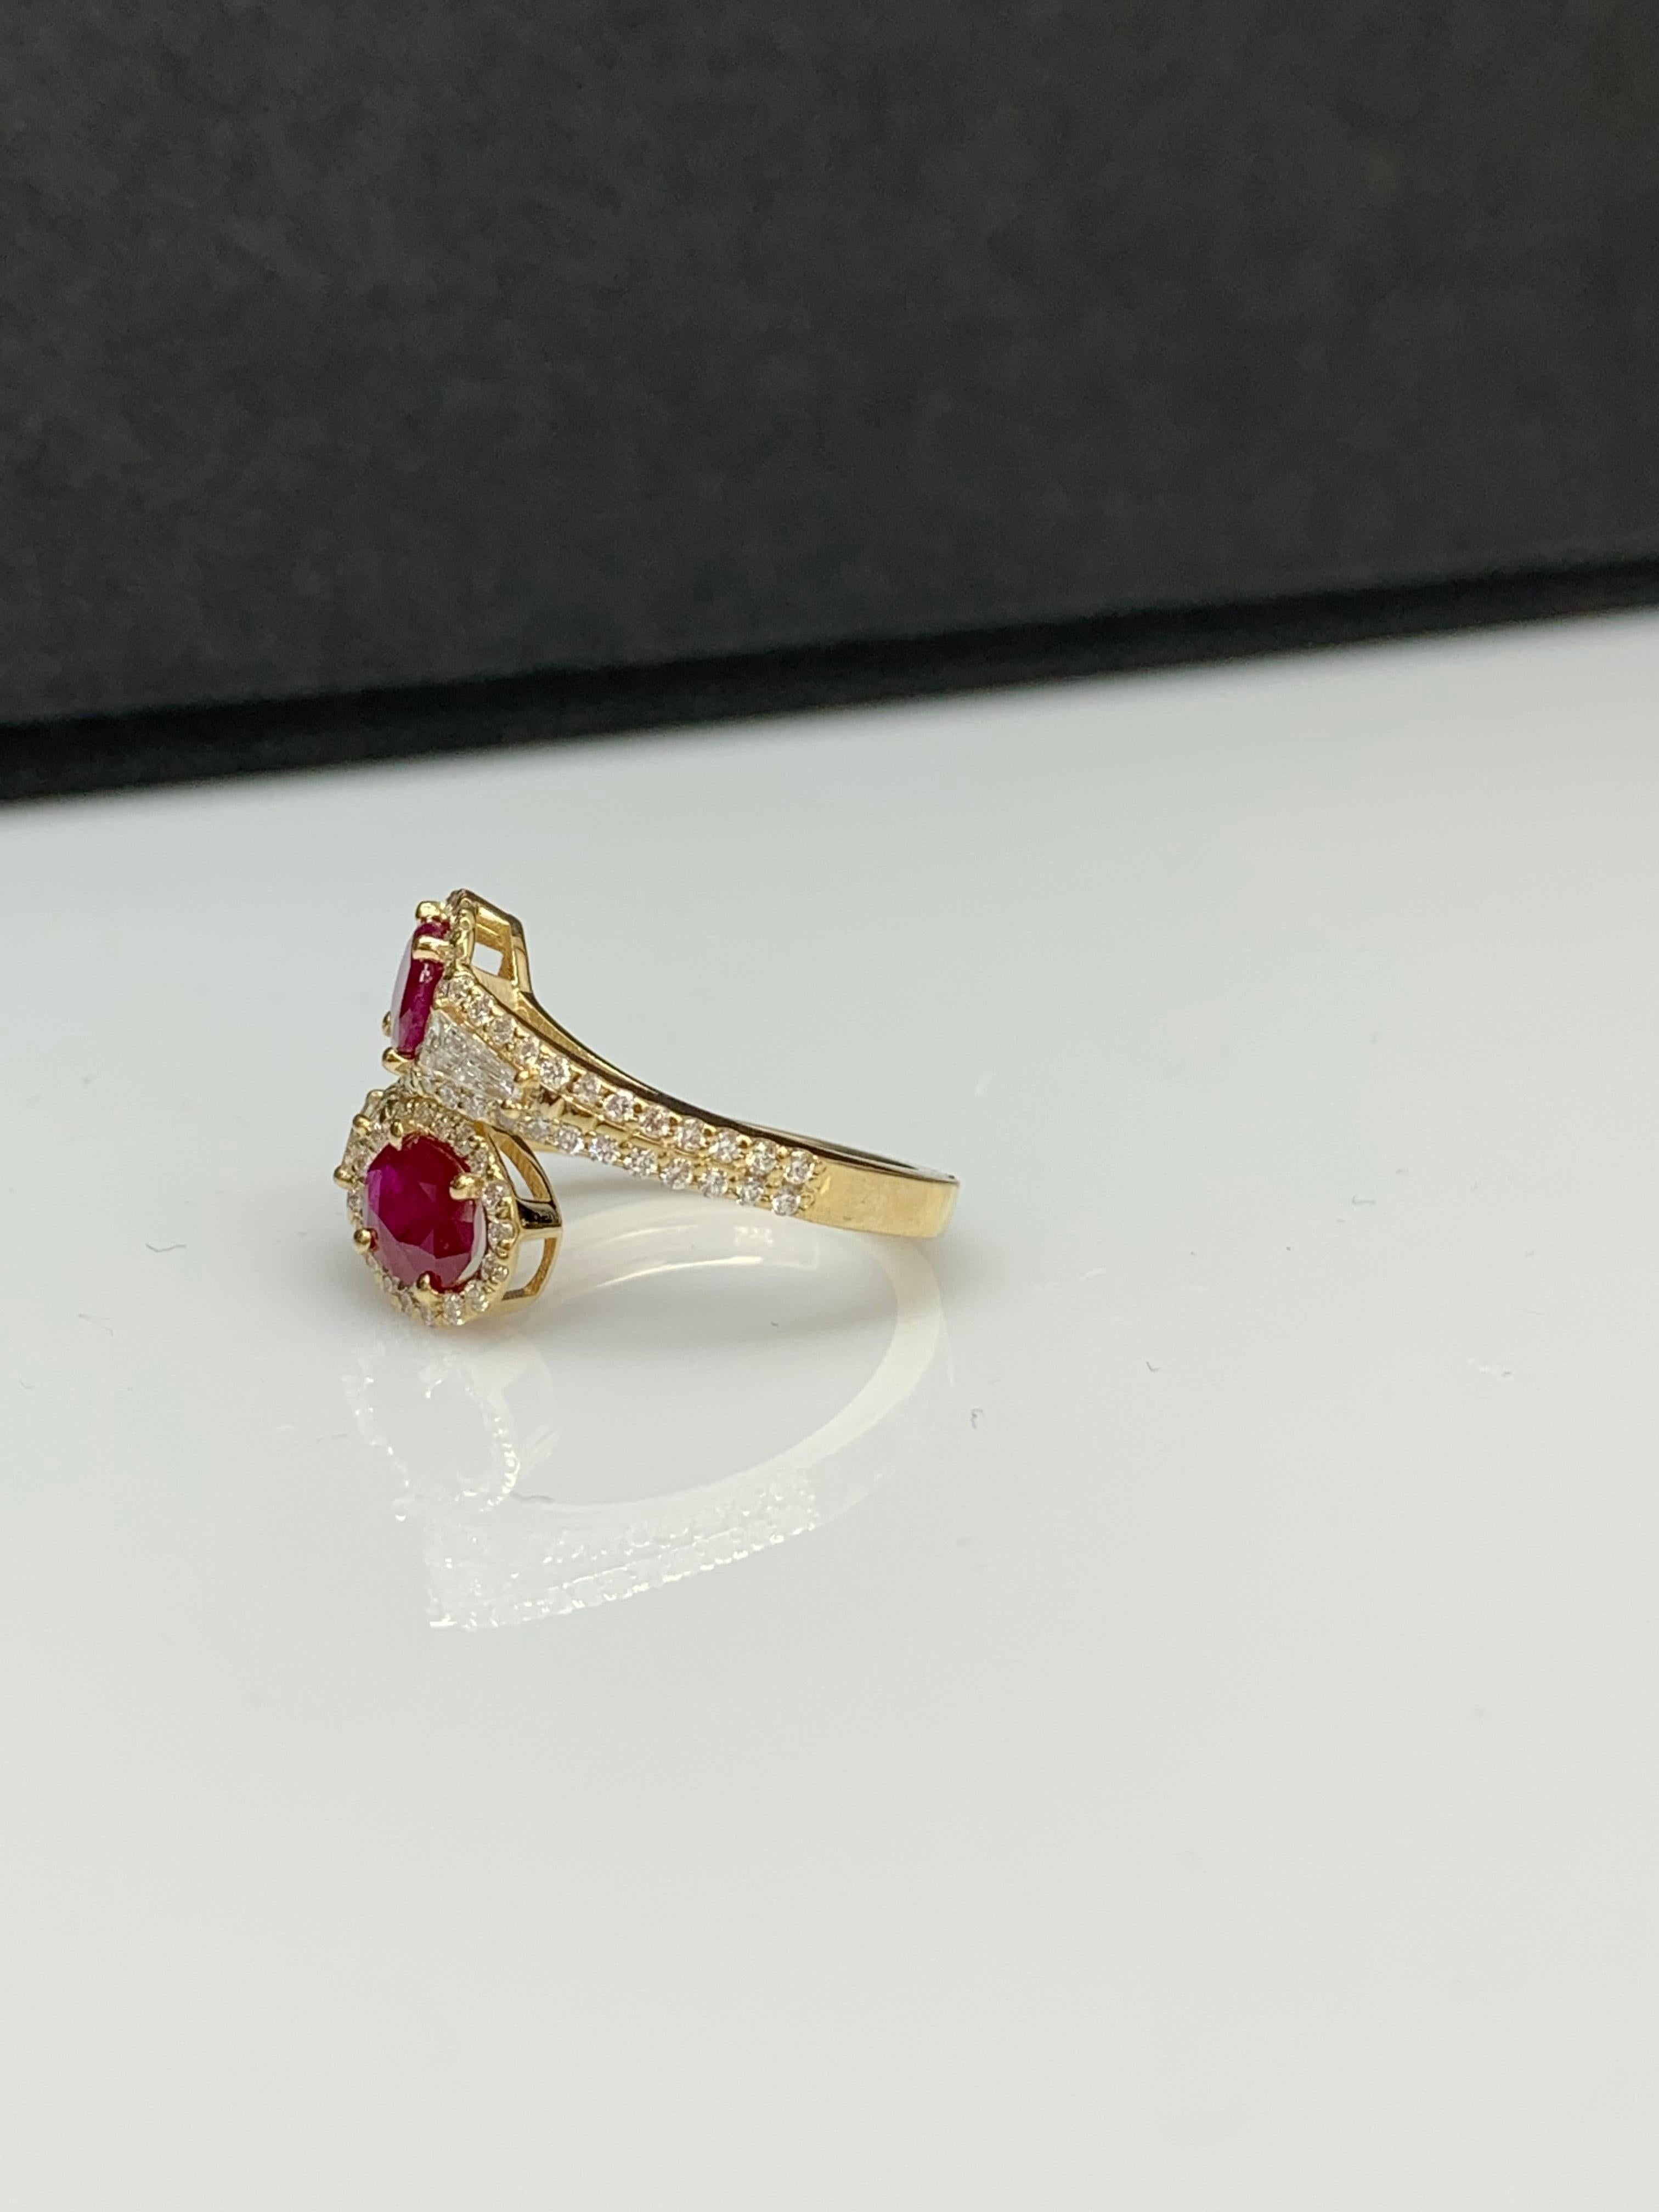 1.67 Carat Oval Cut Ruby Diamond Toi Et Moi Engagement Ring 14K Yellow Gold For Sale 6